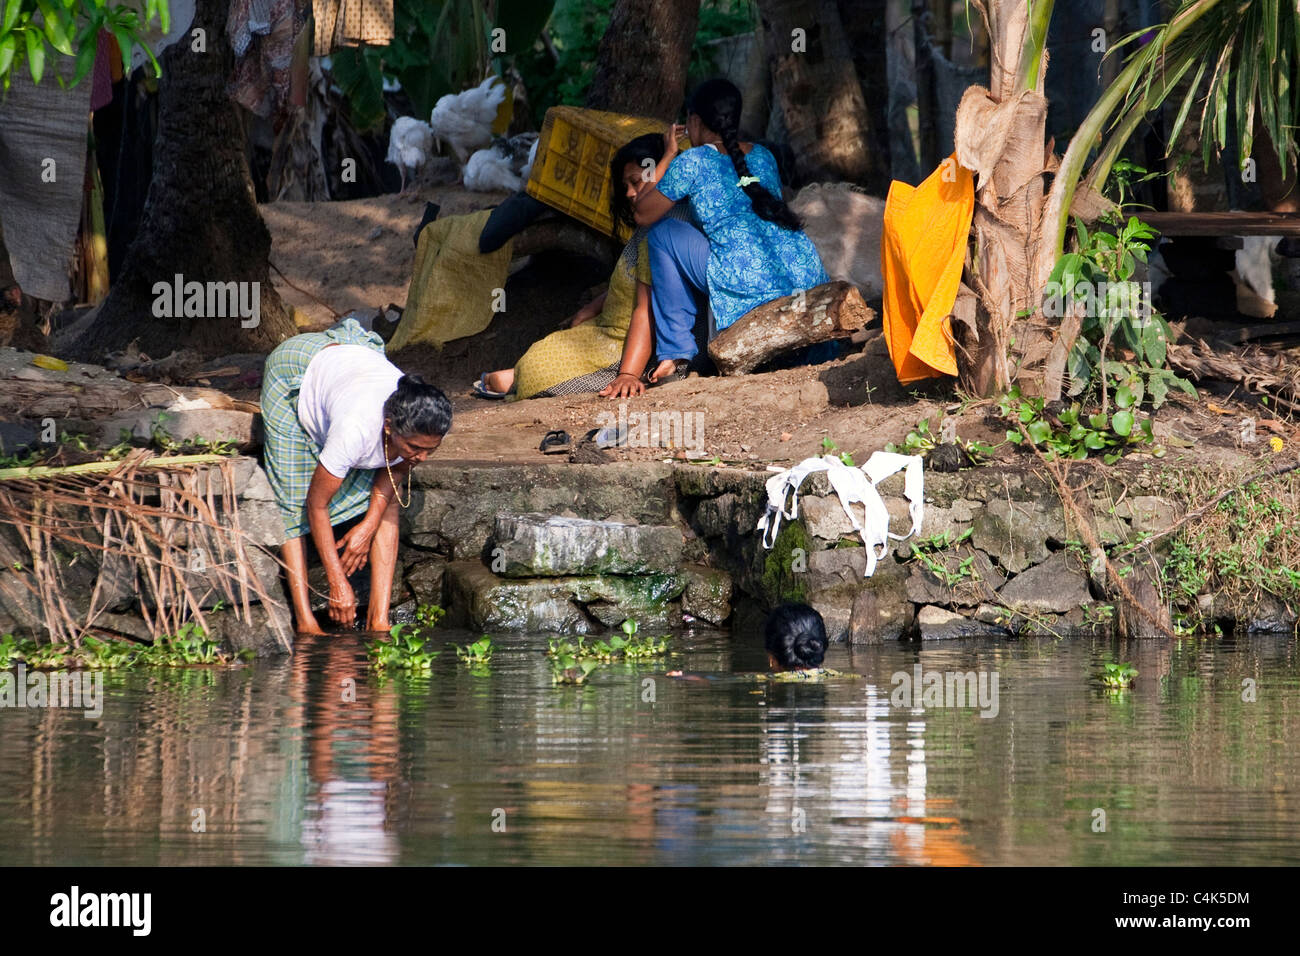 Wash, swim & rest in the backwaters of Alleppey (Alappuzha), Kerala, India Stock Photo